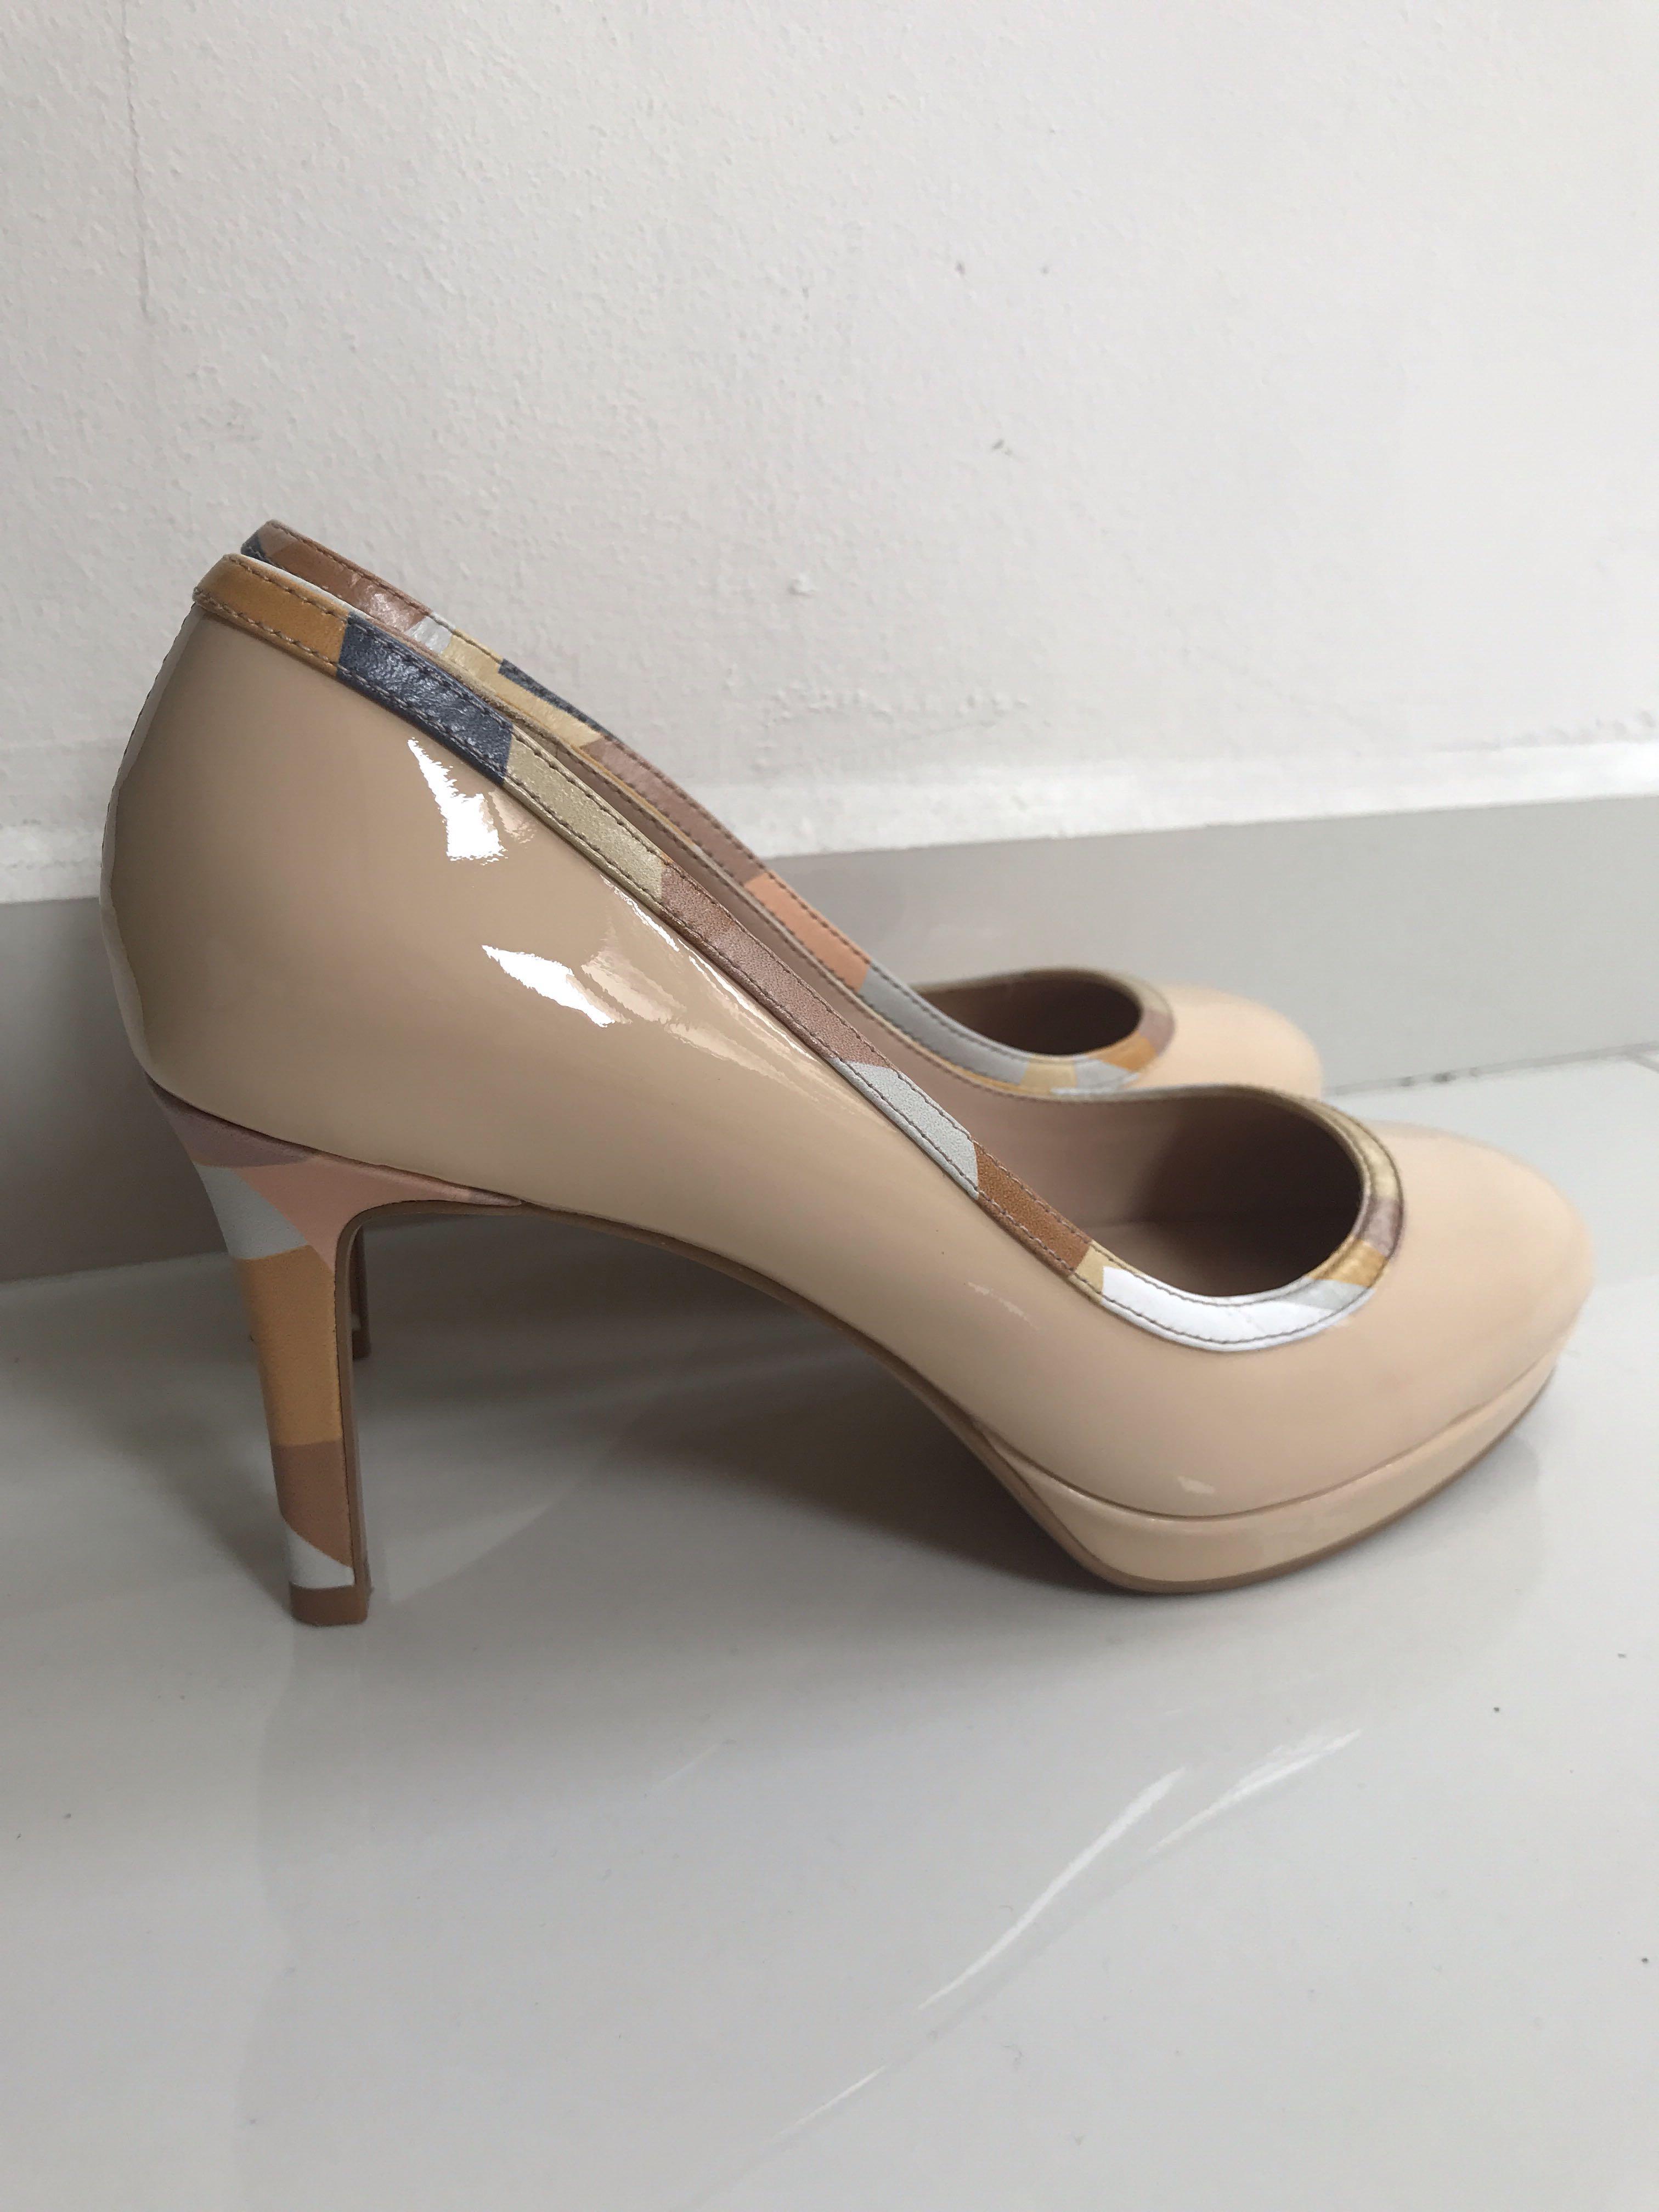 comfy nude shoes